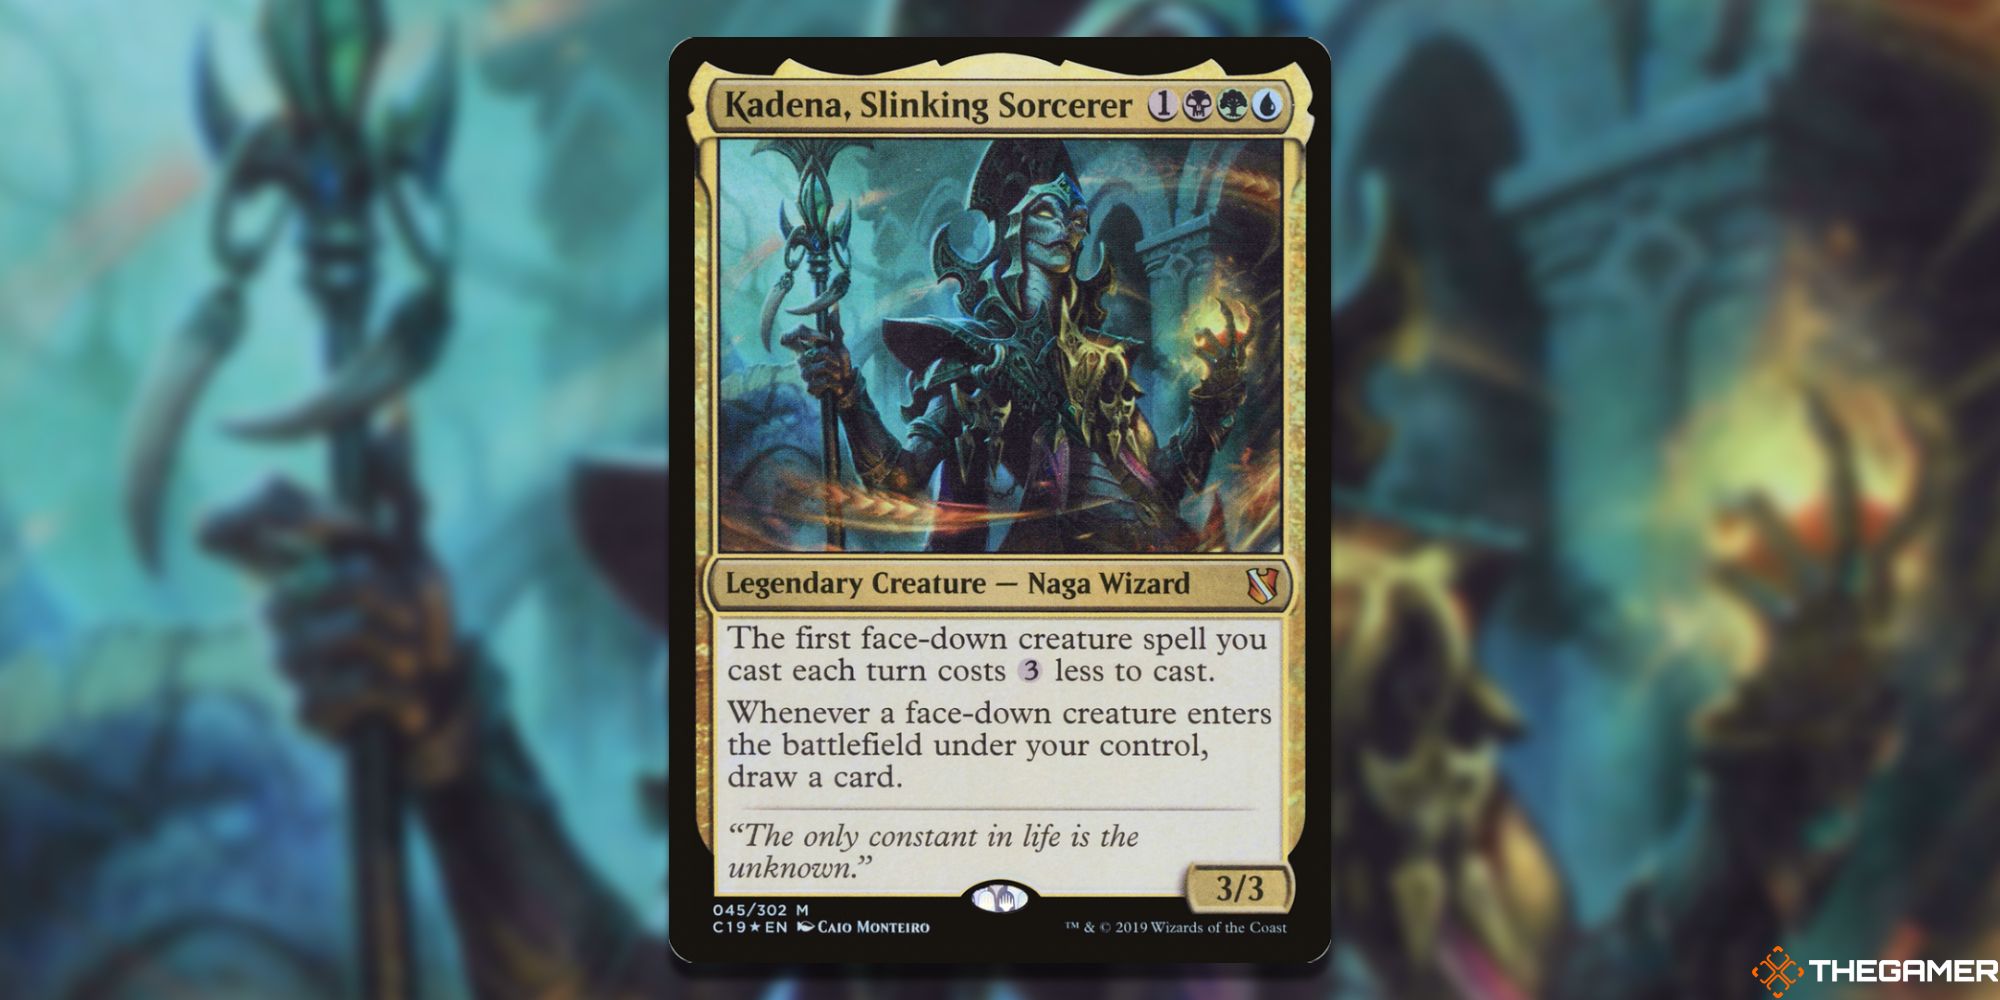 Image of the Kadena, Slinking Sorcerer card in Magic: The Gathering, with art by Caio Monteiro